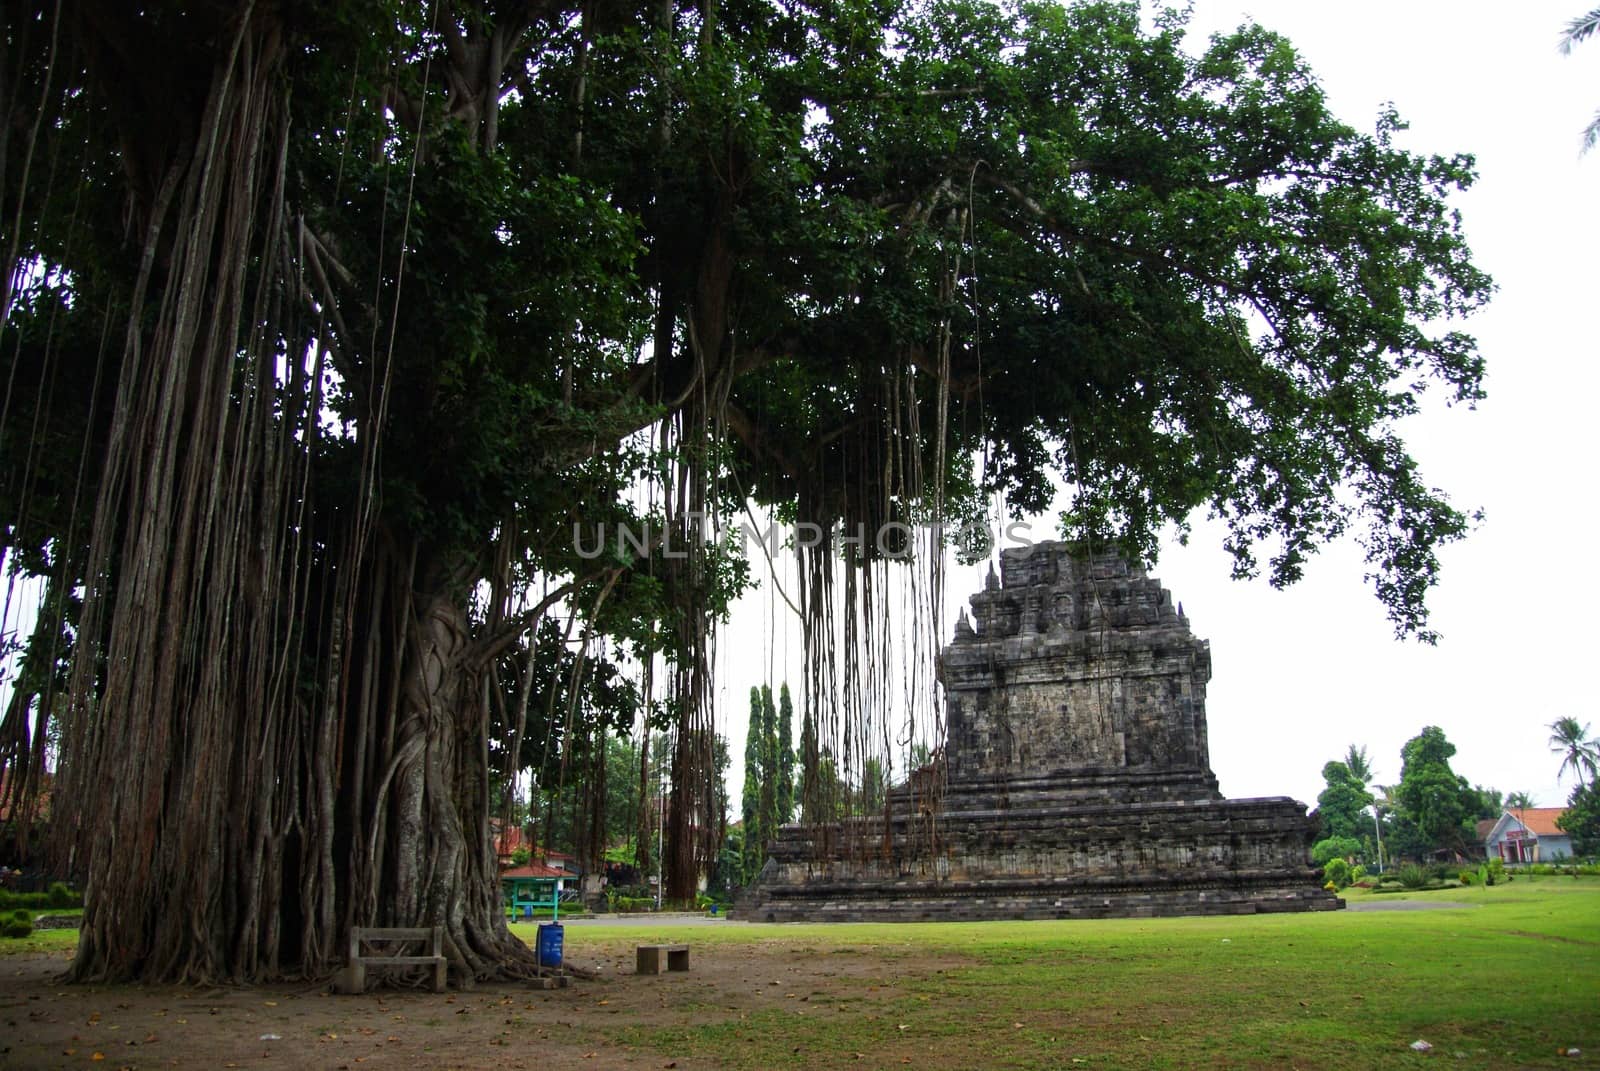 Mendut Temple, another ancient monument found in Yogyakarta, Indonesia